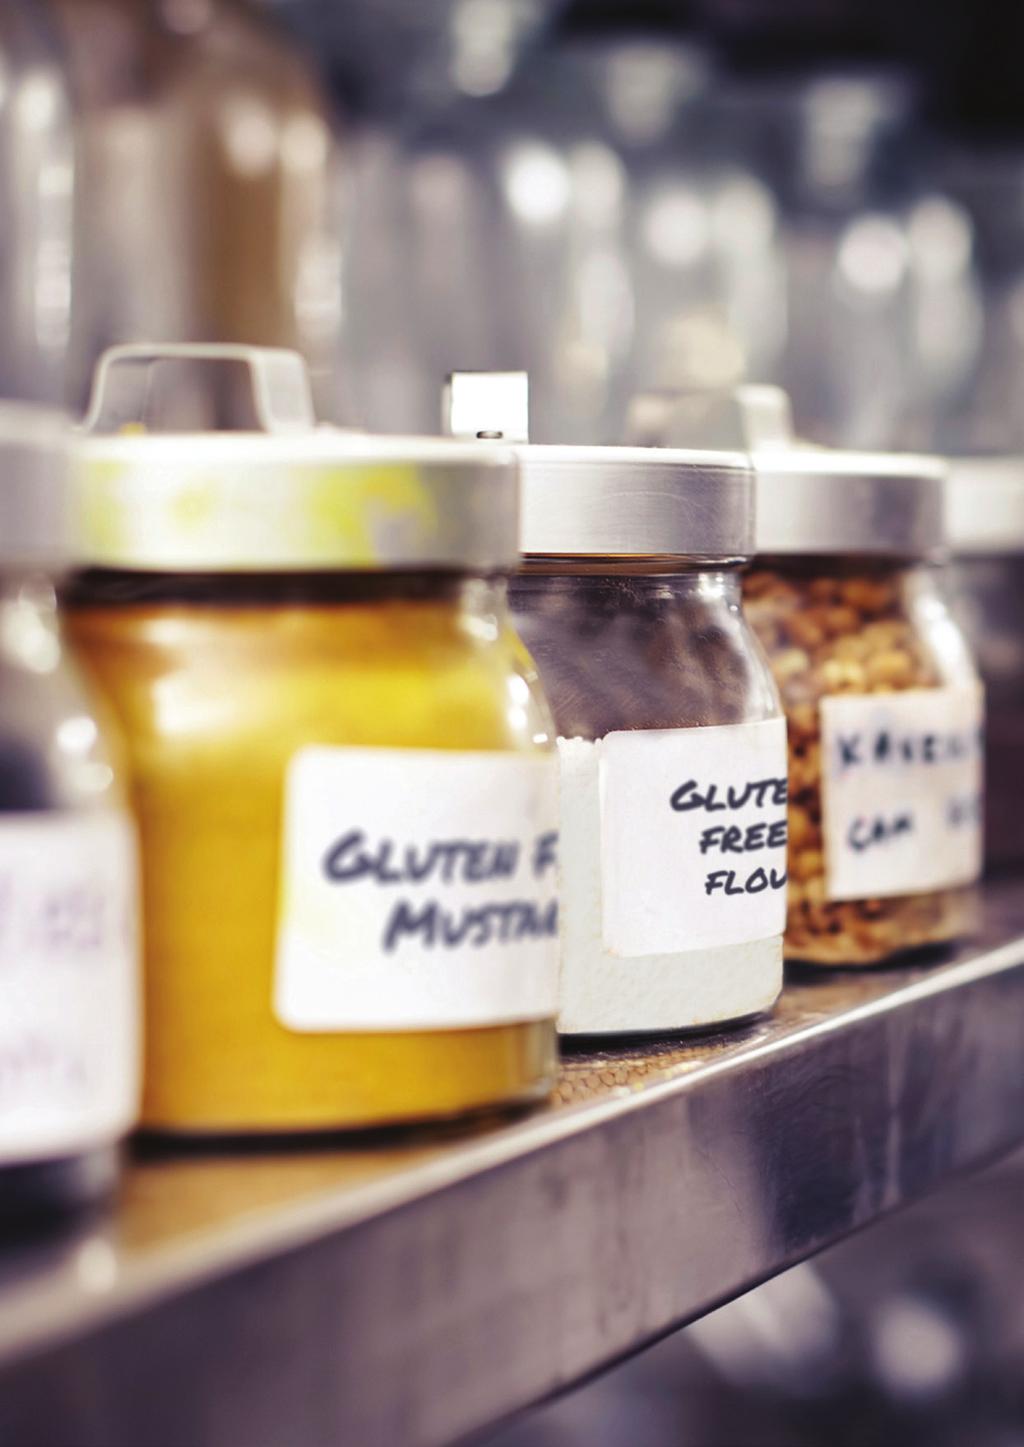 Storage Did you know 75% of diners fear cross contamination in the kitchen 6? Make sure your kitchen isn't one of them. The first step is to properly store gluten-free ingredients.